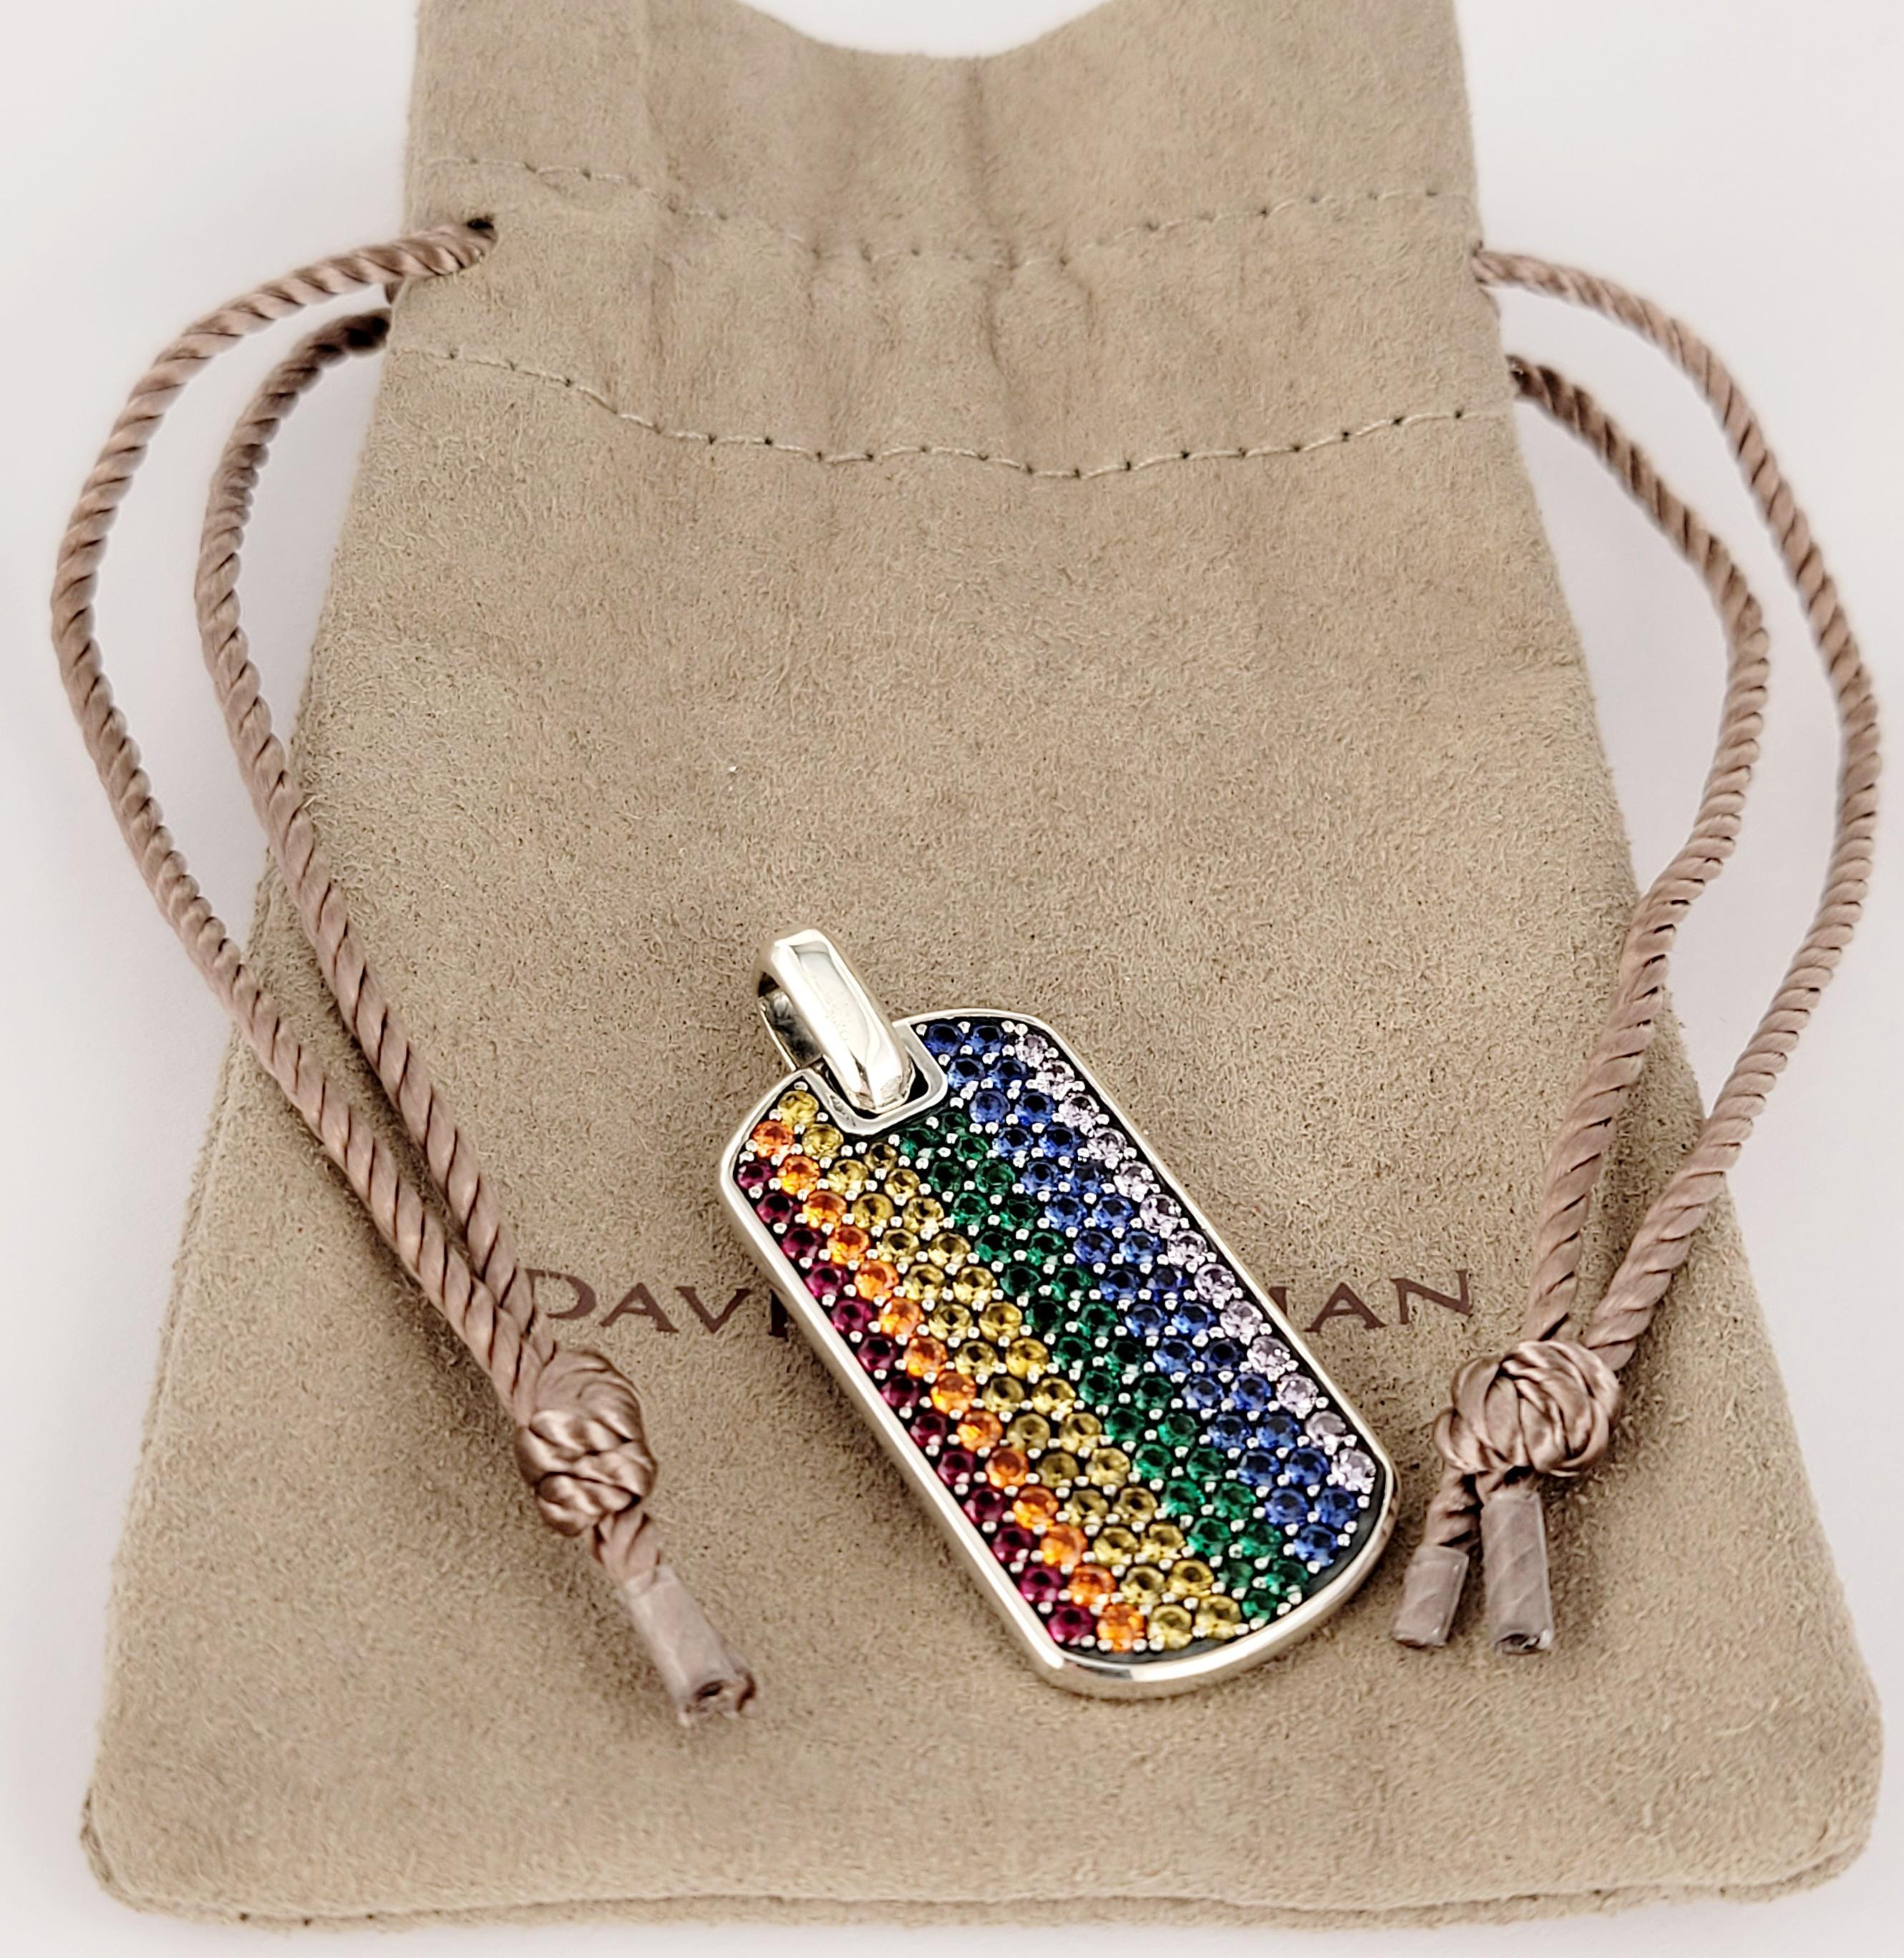 Brand David Yurman
Chevron Collection for Men
Material Sterling Silver 925
Pavé sapphires, tsavorites, yellow sapphires, orange sapphires,
purple sapphires and rubies, 2.02 total carat weight
Pendant Dimension 32.5 X 17.5mm
With Bail 38.5mm
Pendant